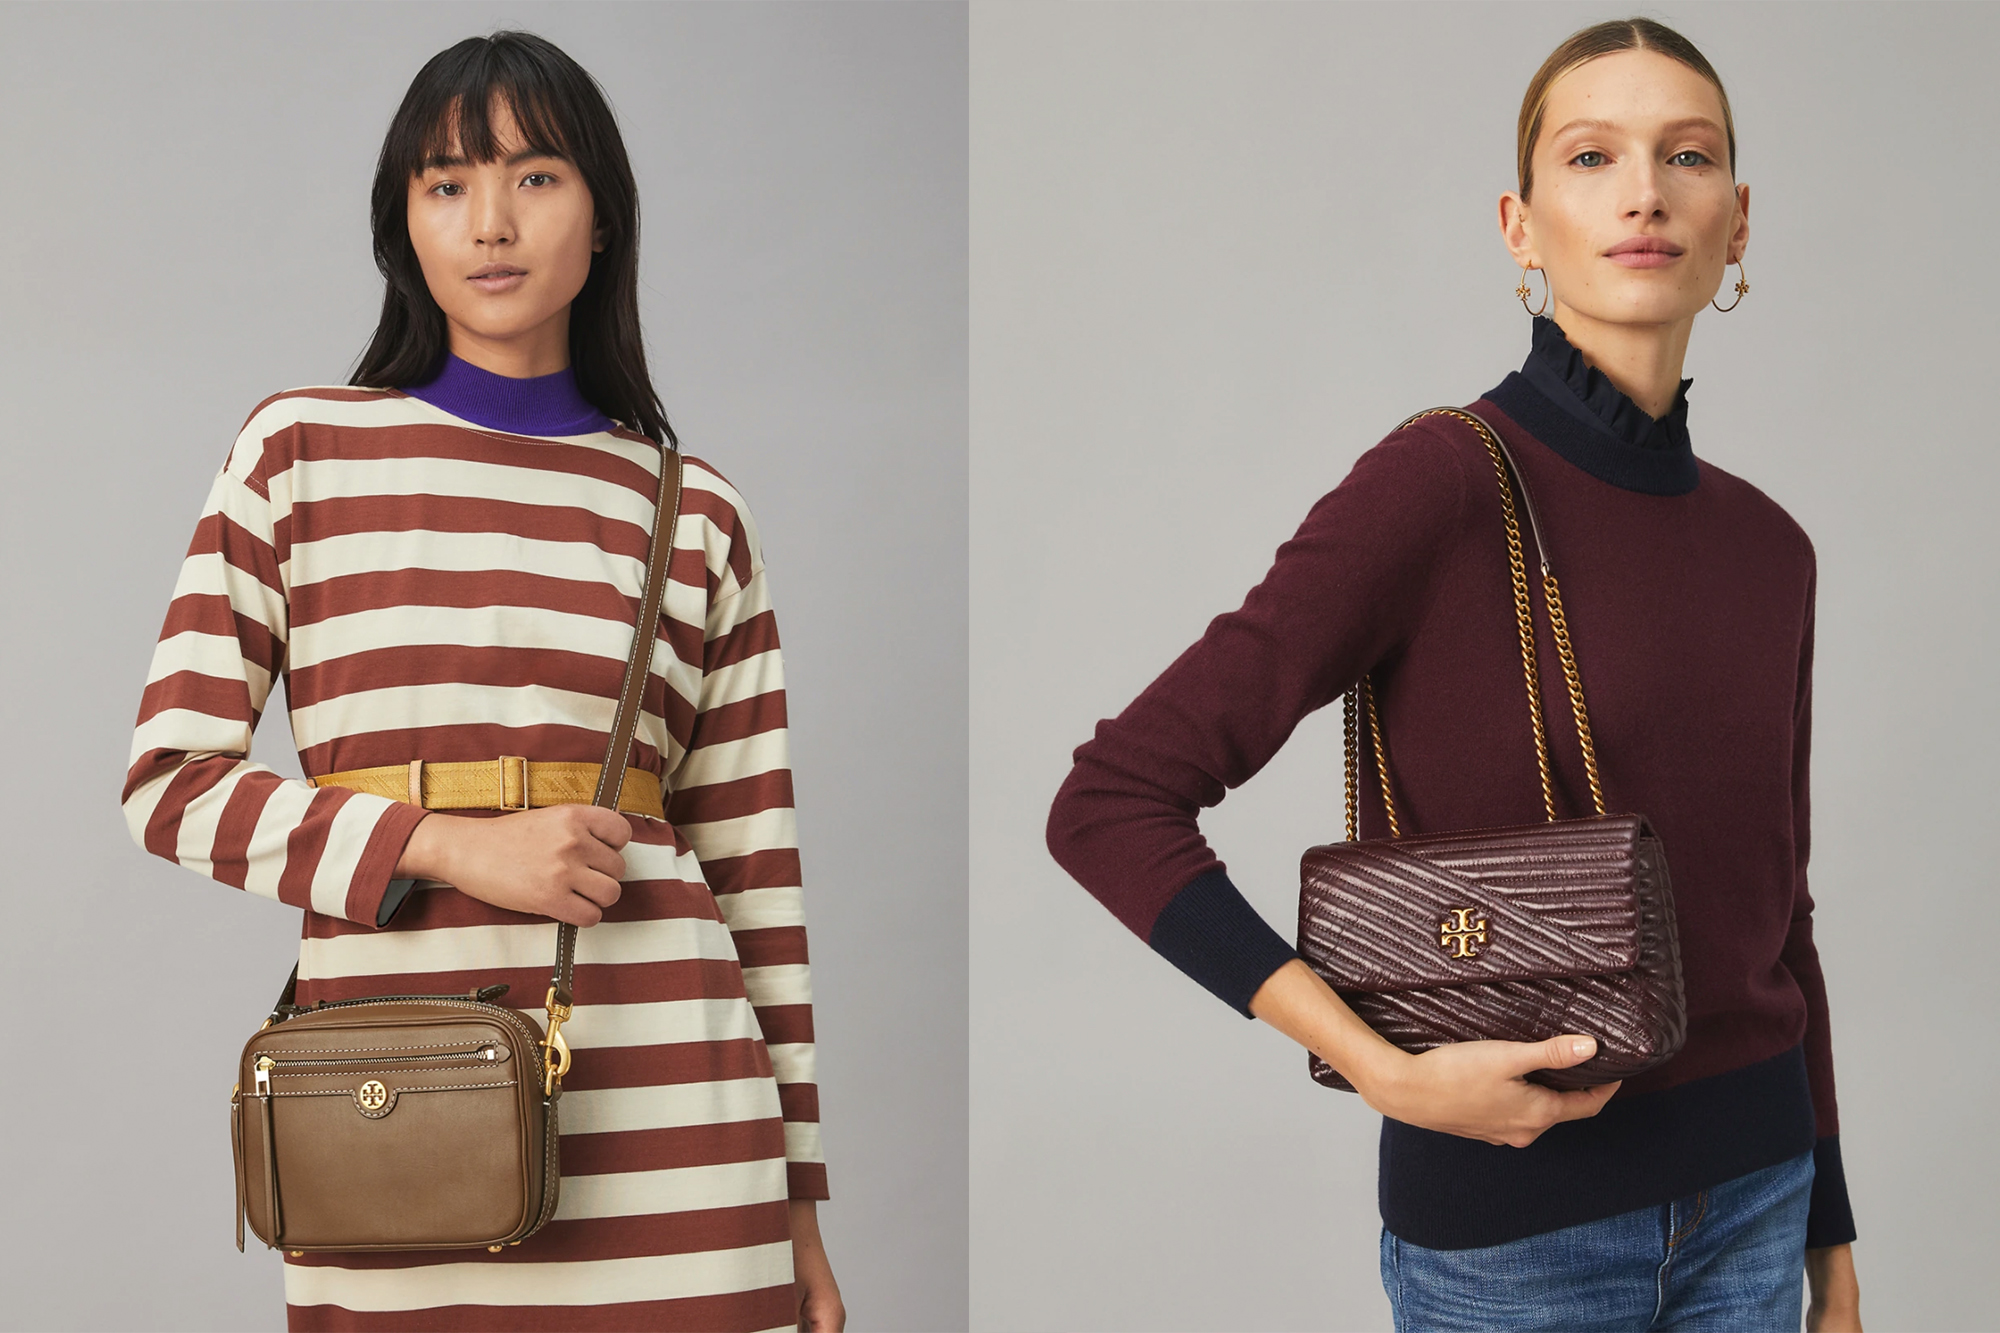 Tory Burch Still Has So Many Gift Options That Will Ship in Time